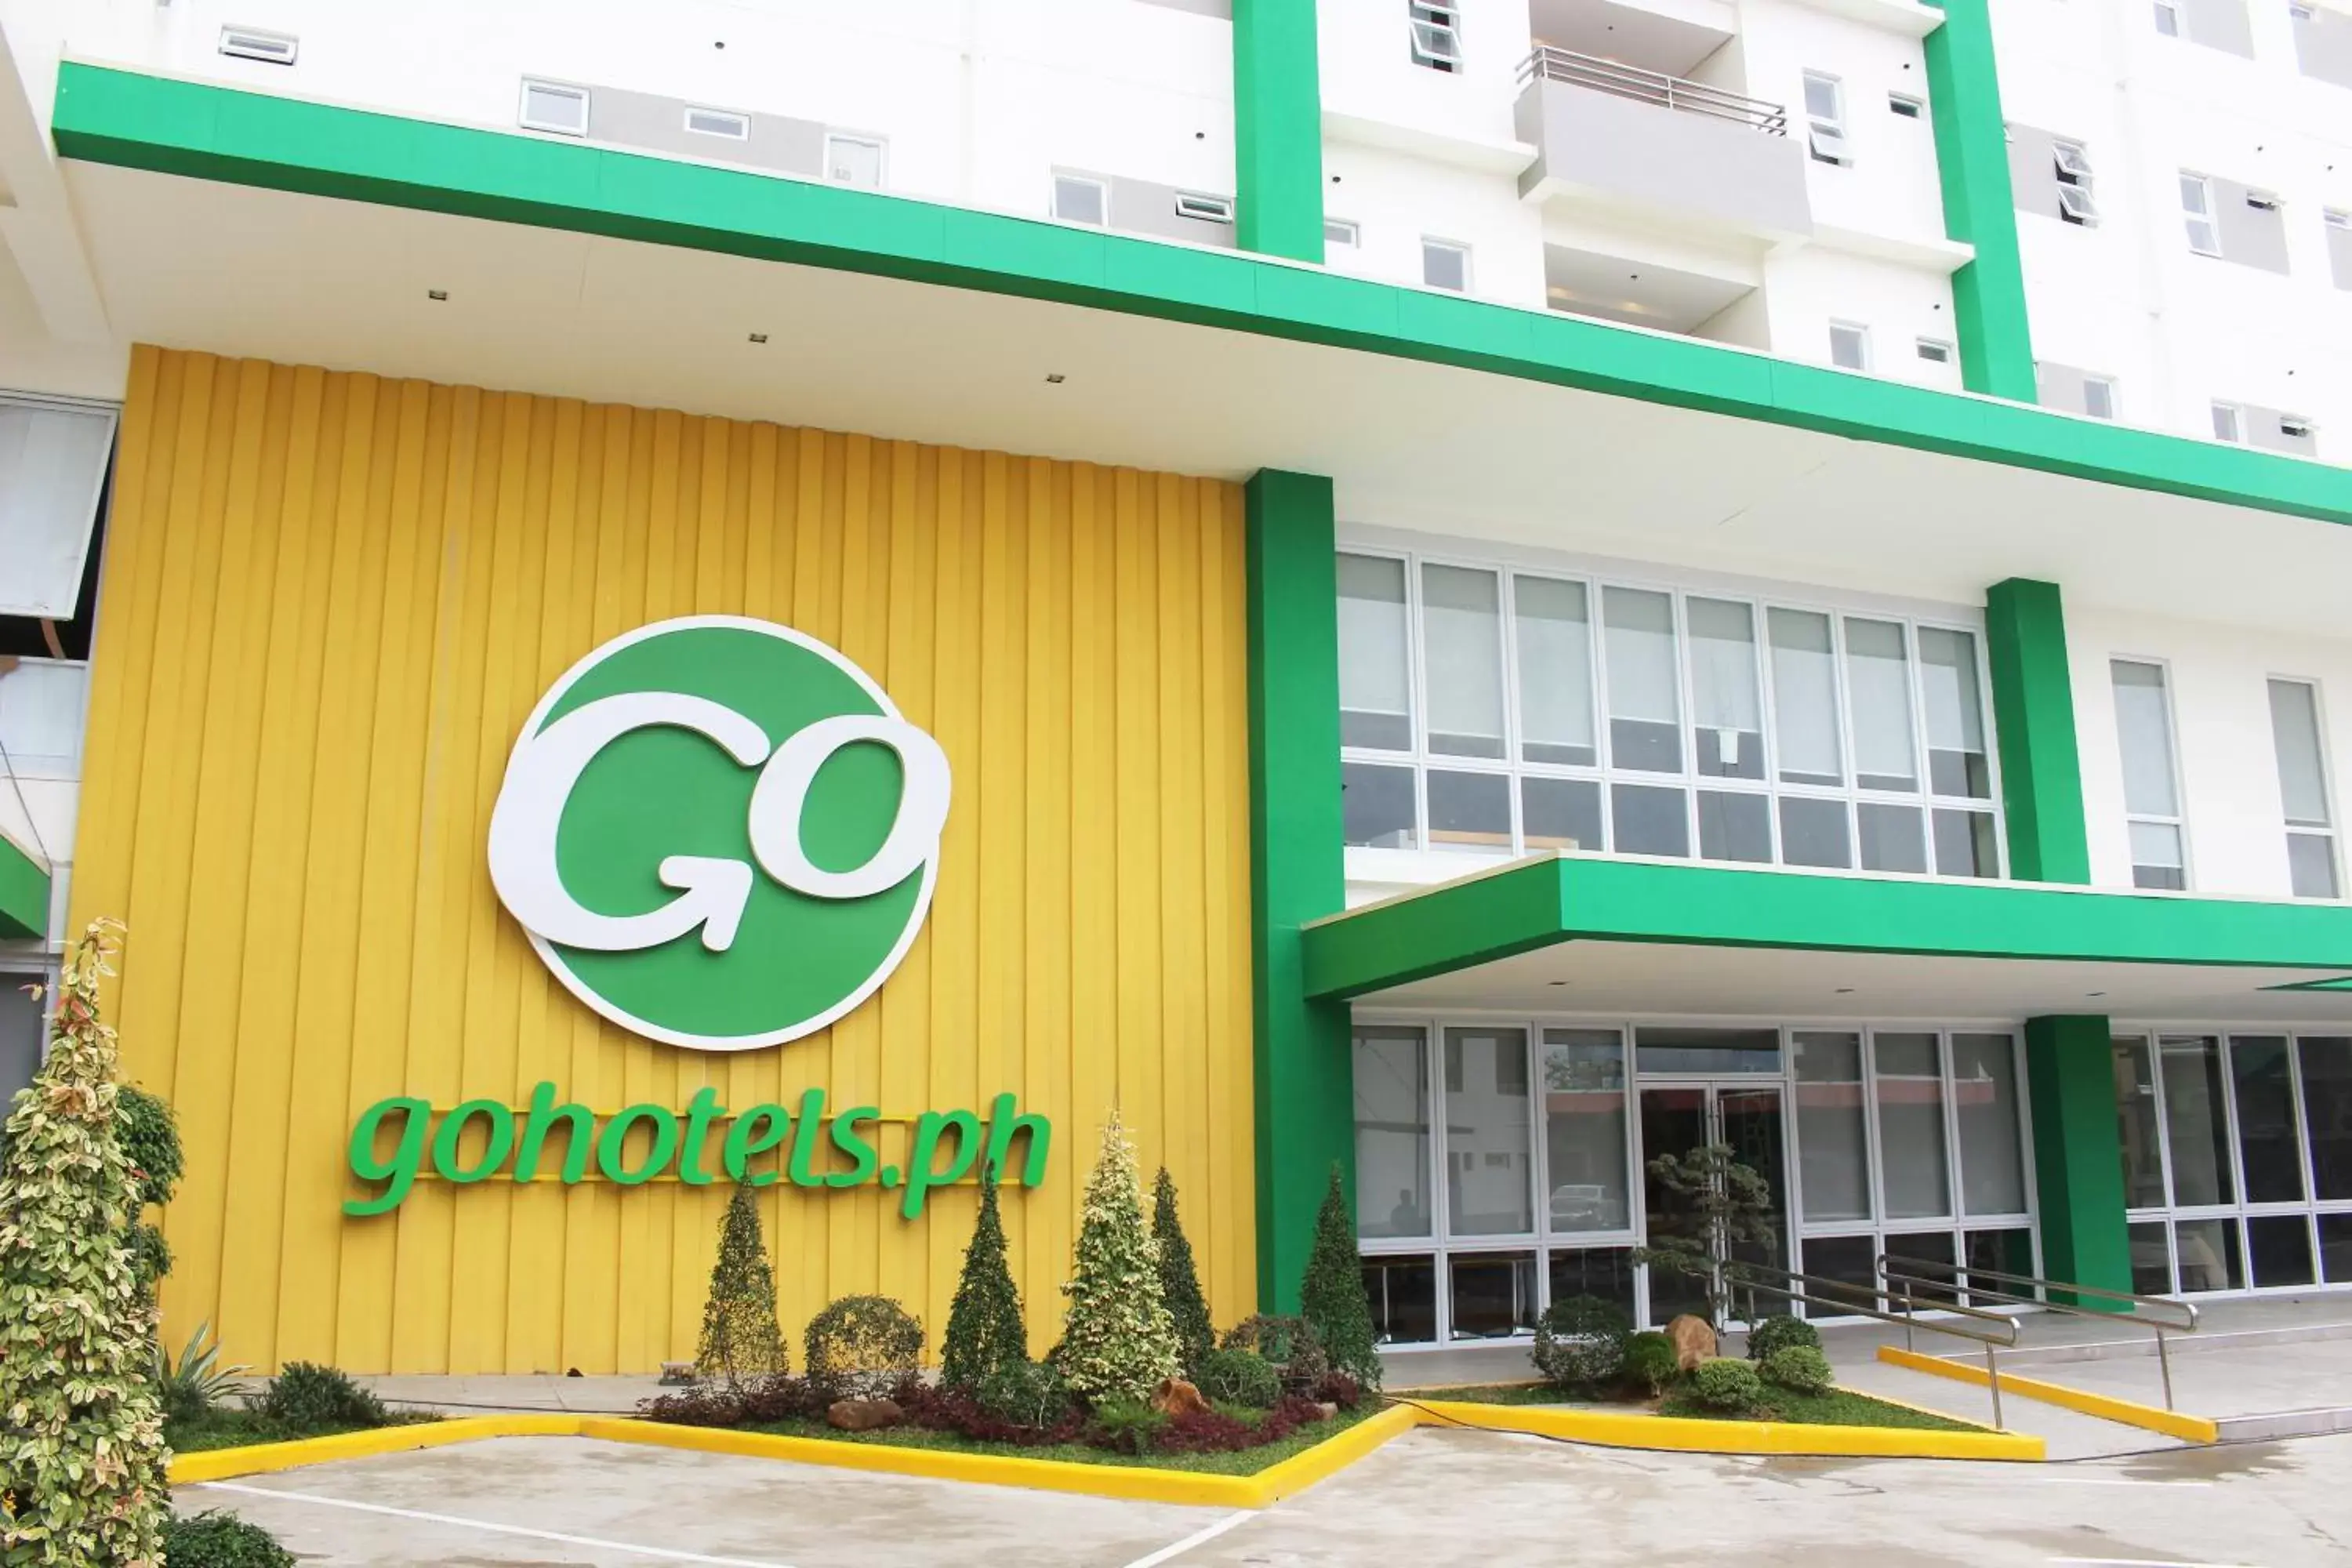 Property Building in Go Hotels Lanang - Davao